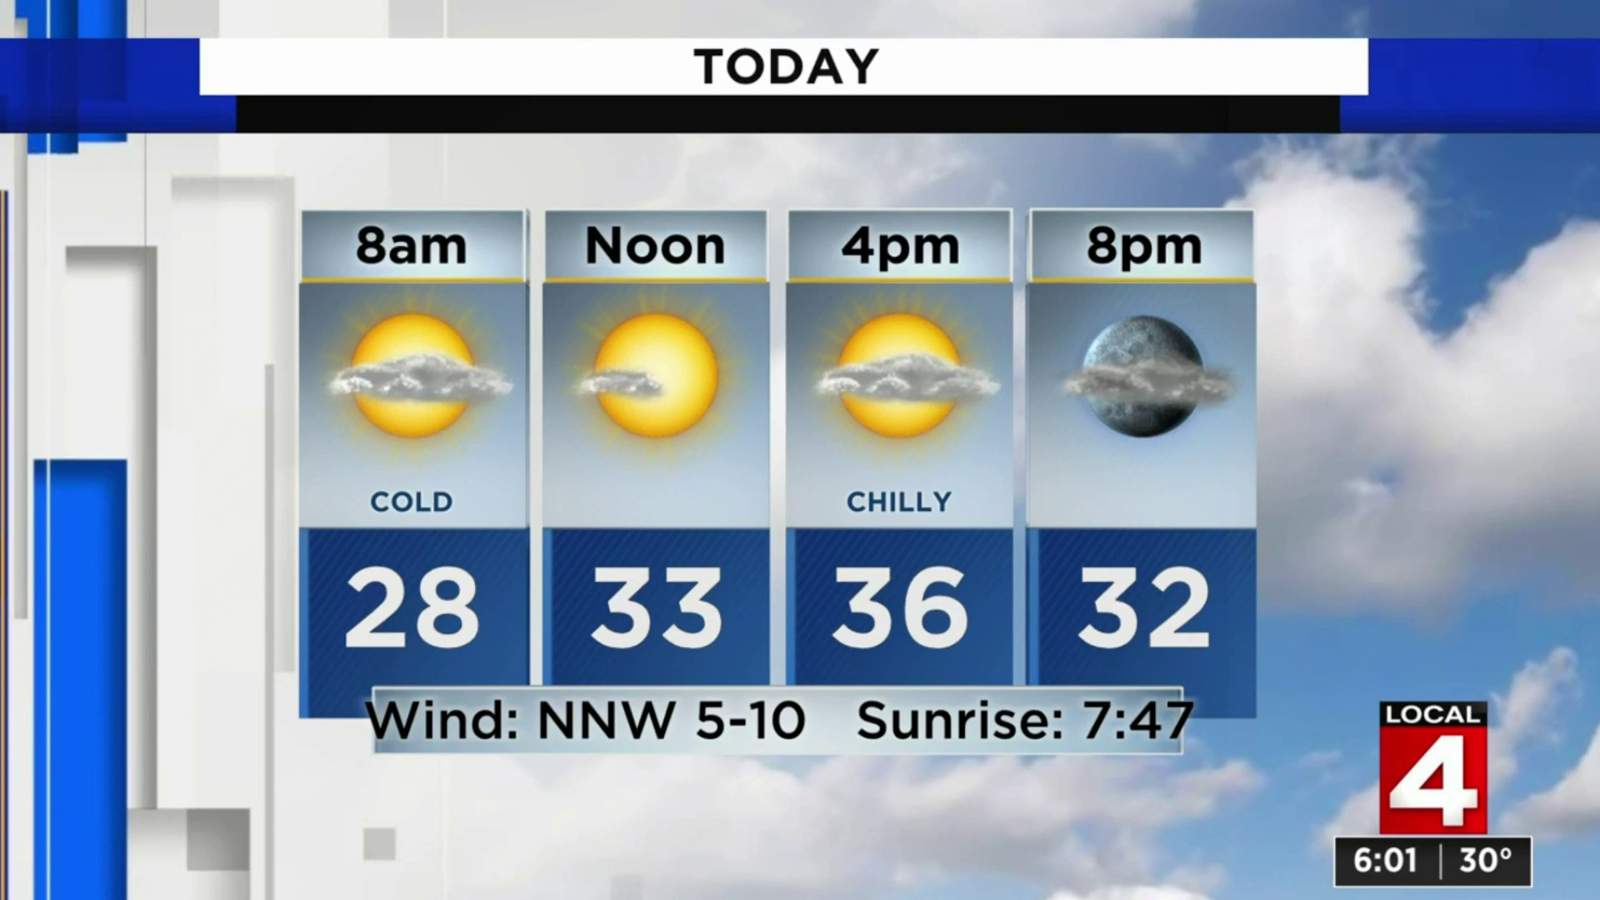 Metro Detroit weather: Colder Saturday with clouds and sun